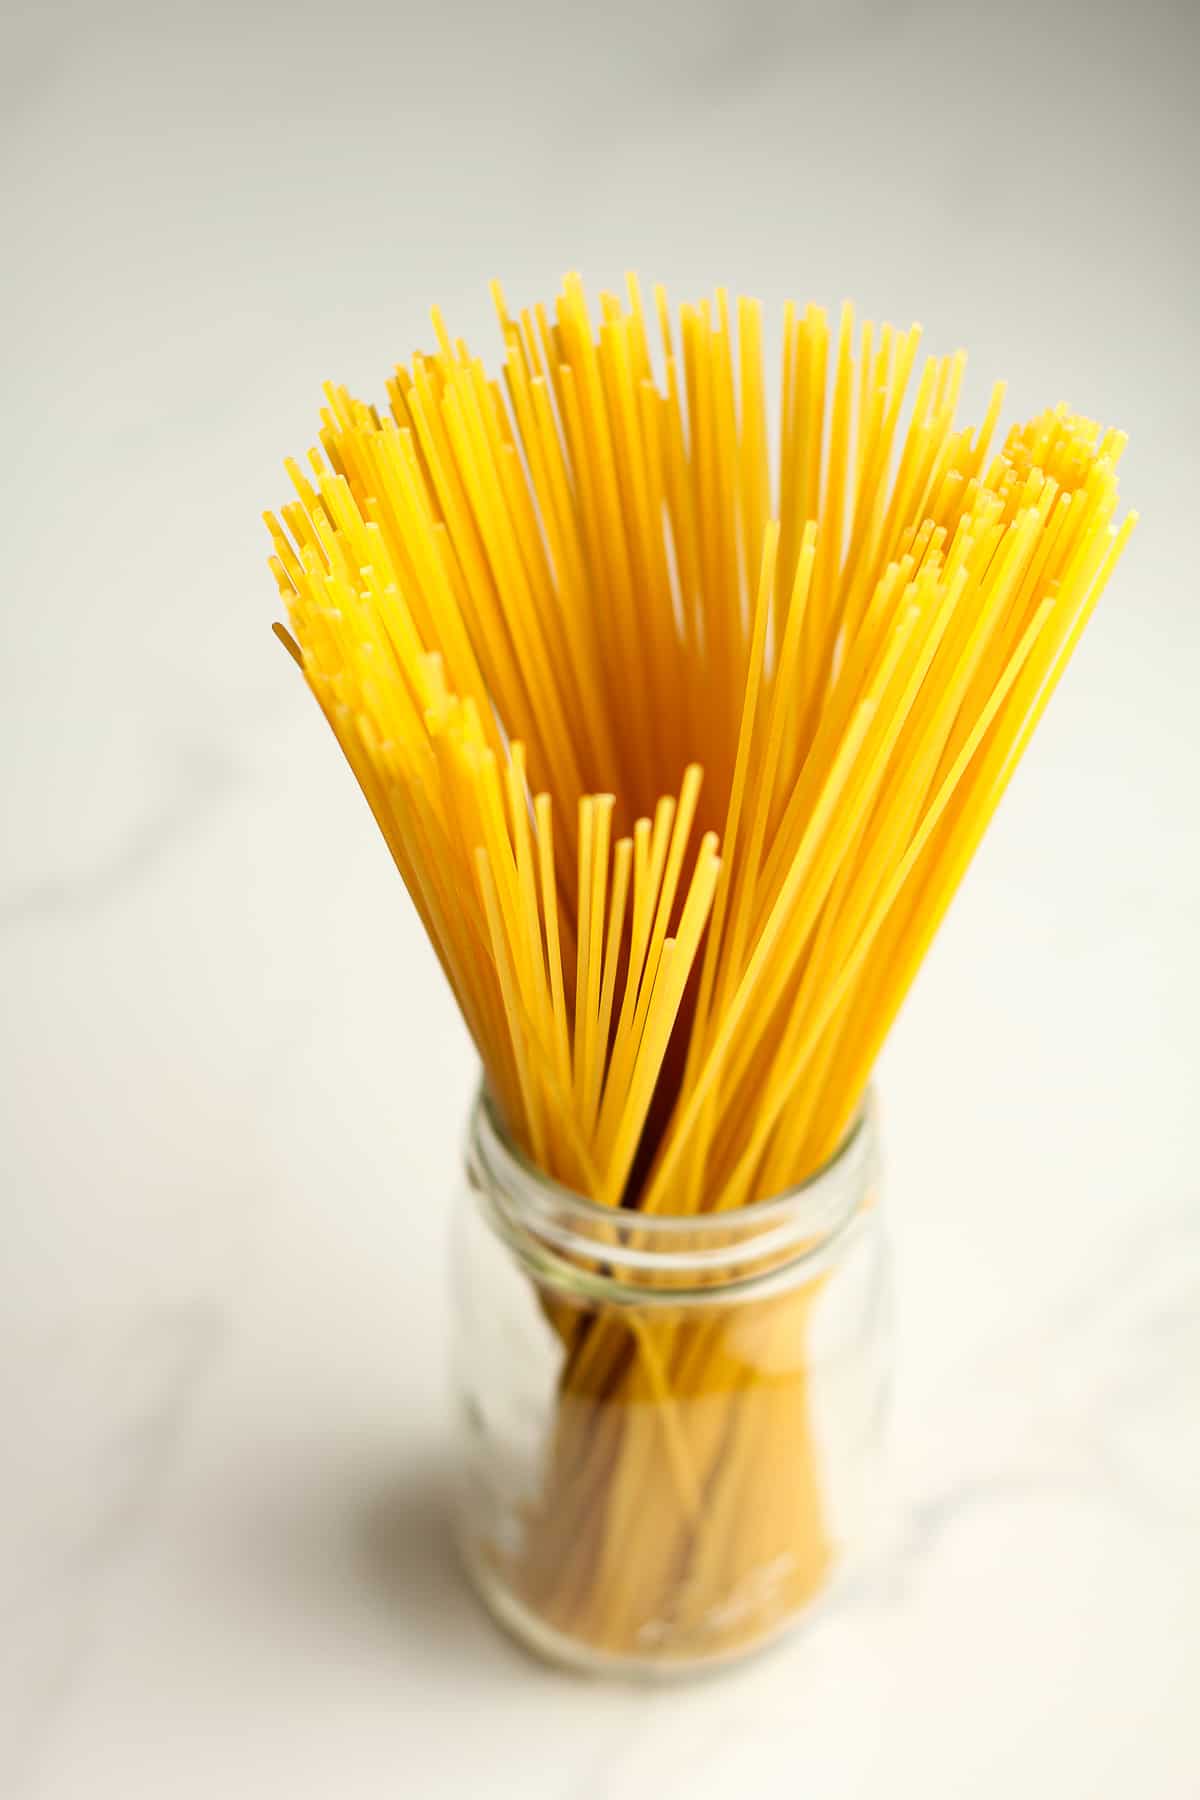 A jar of the spaghetti noodles.